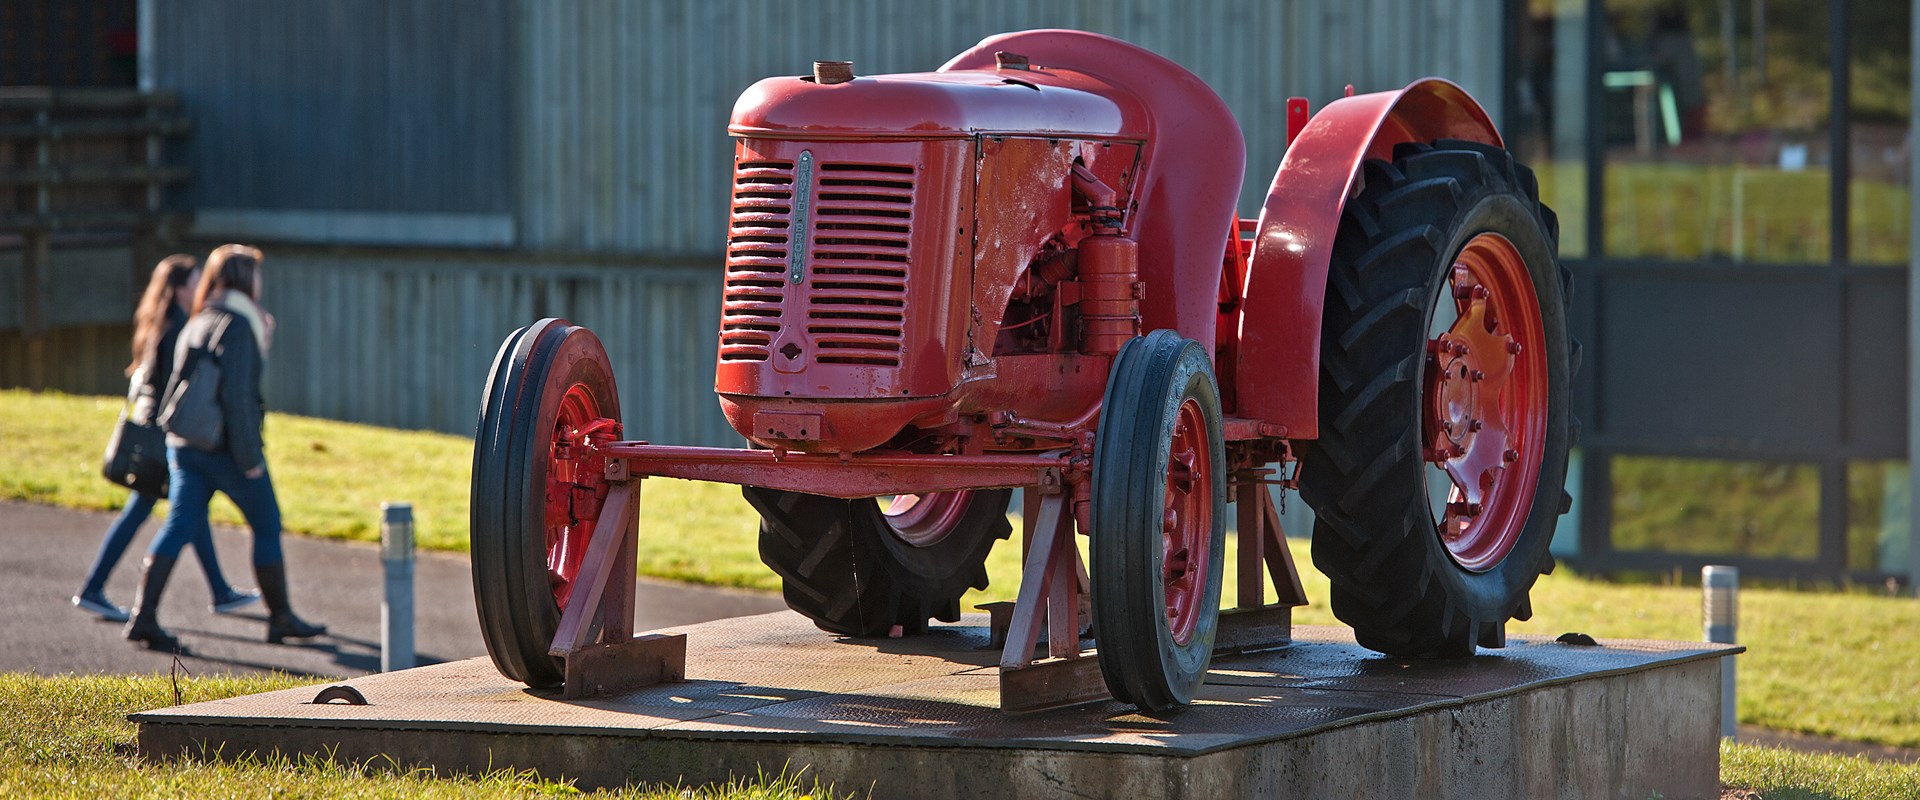 Bright red tractor outside the National Museum of Rural Life